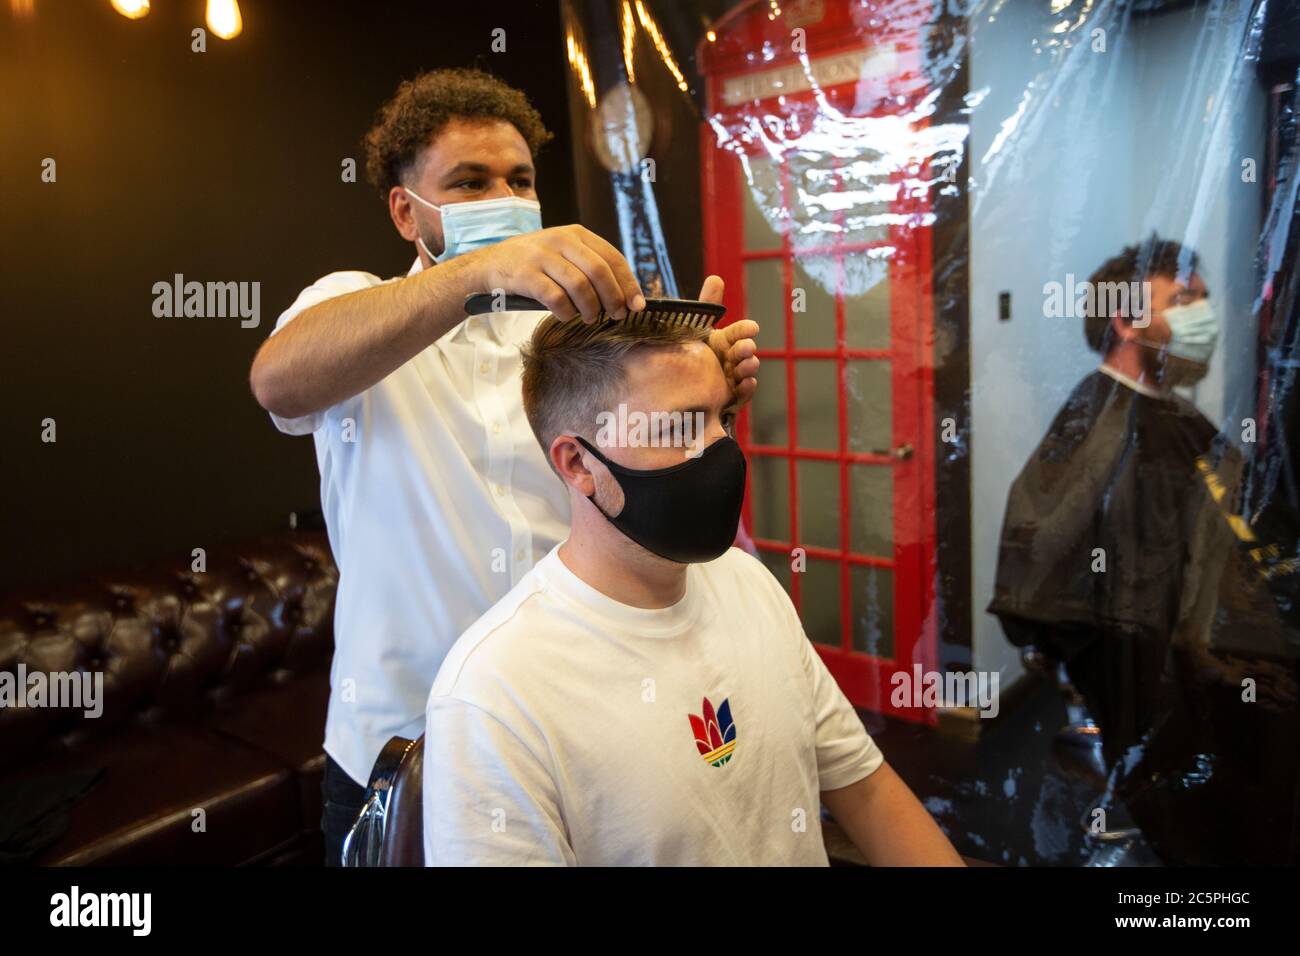 Gentleman's Barber hair salon reopened with precautionary plastic sheeting and stylist wearing face masks after the coronavirus lockdown restrictions. Stock Photo